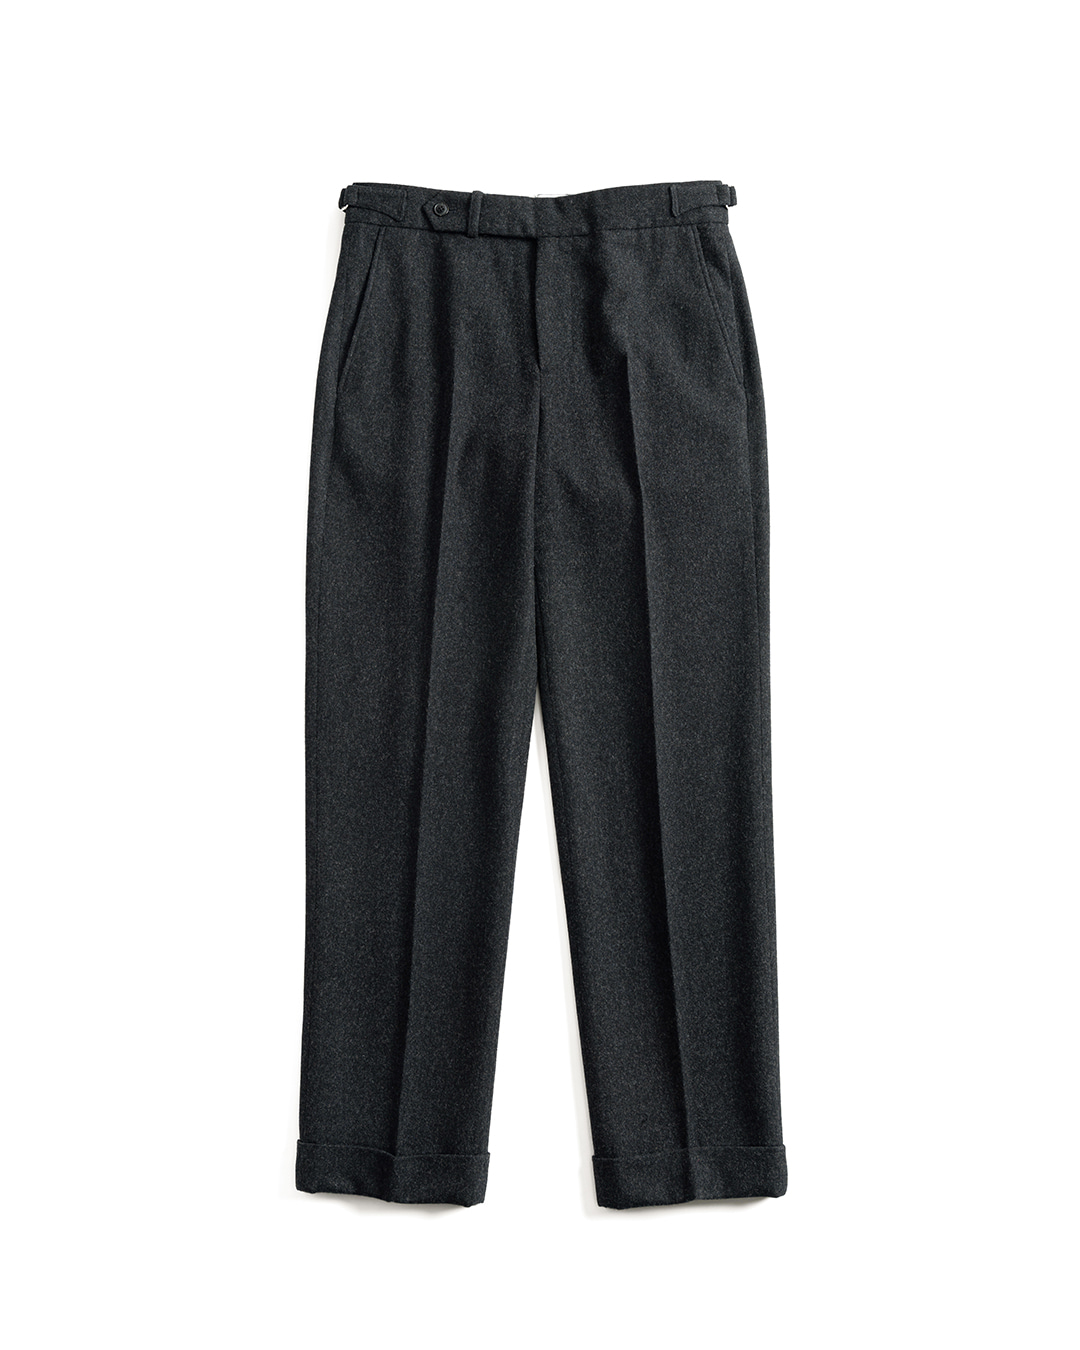 10 WOOL FLANNEL TROUSERS (charcoal)